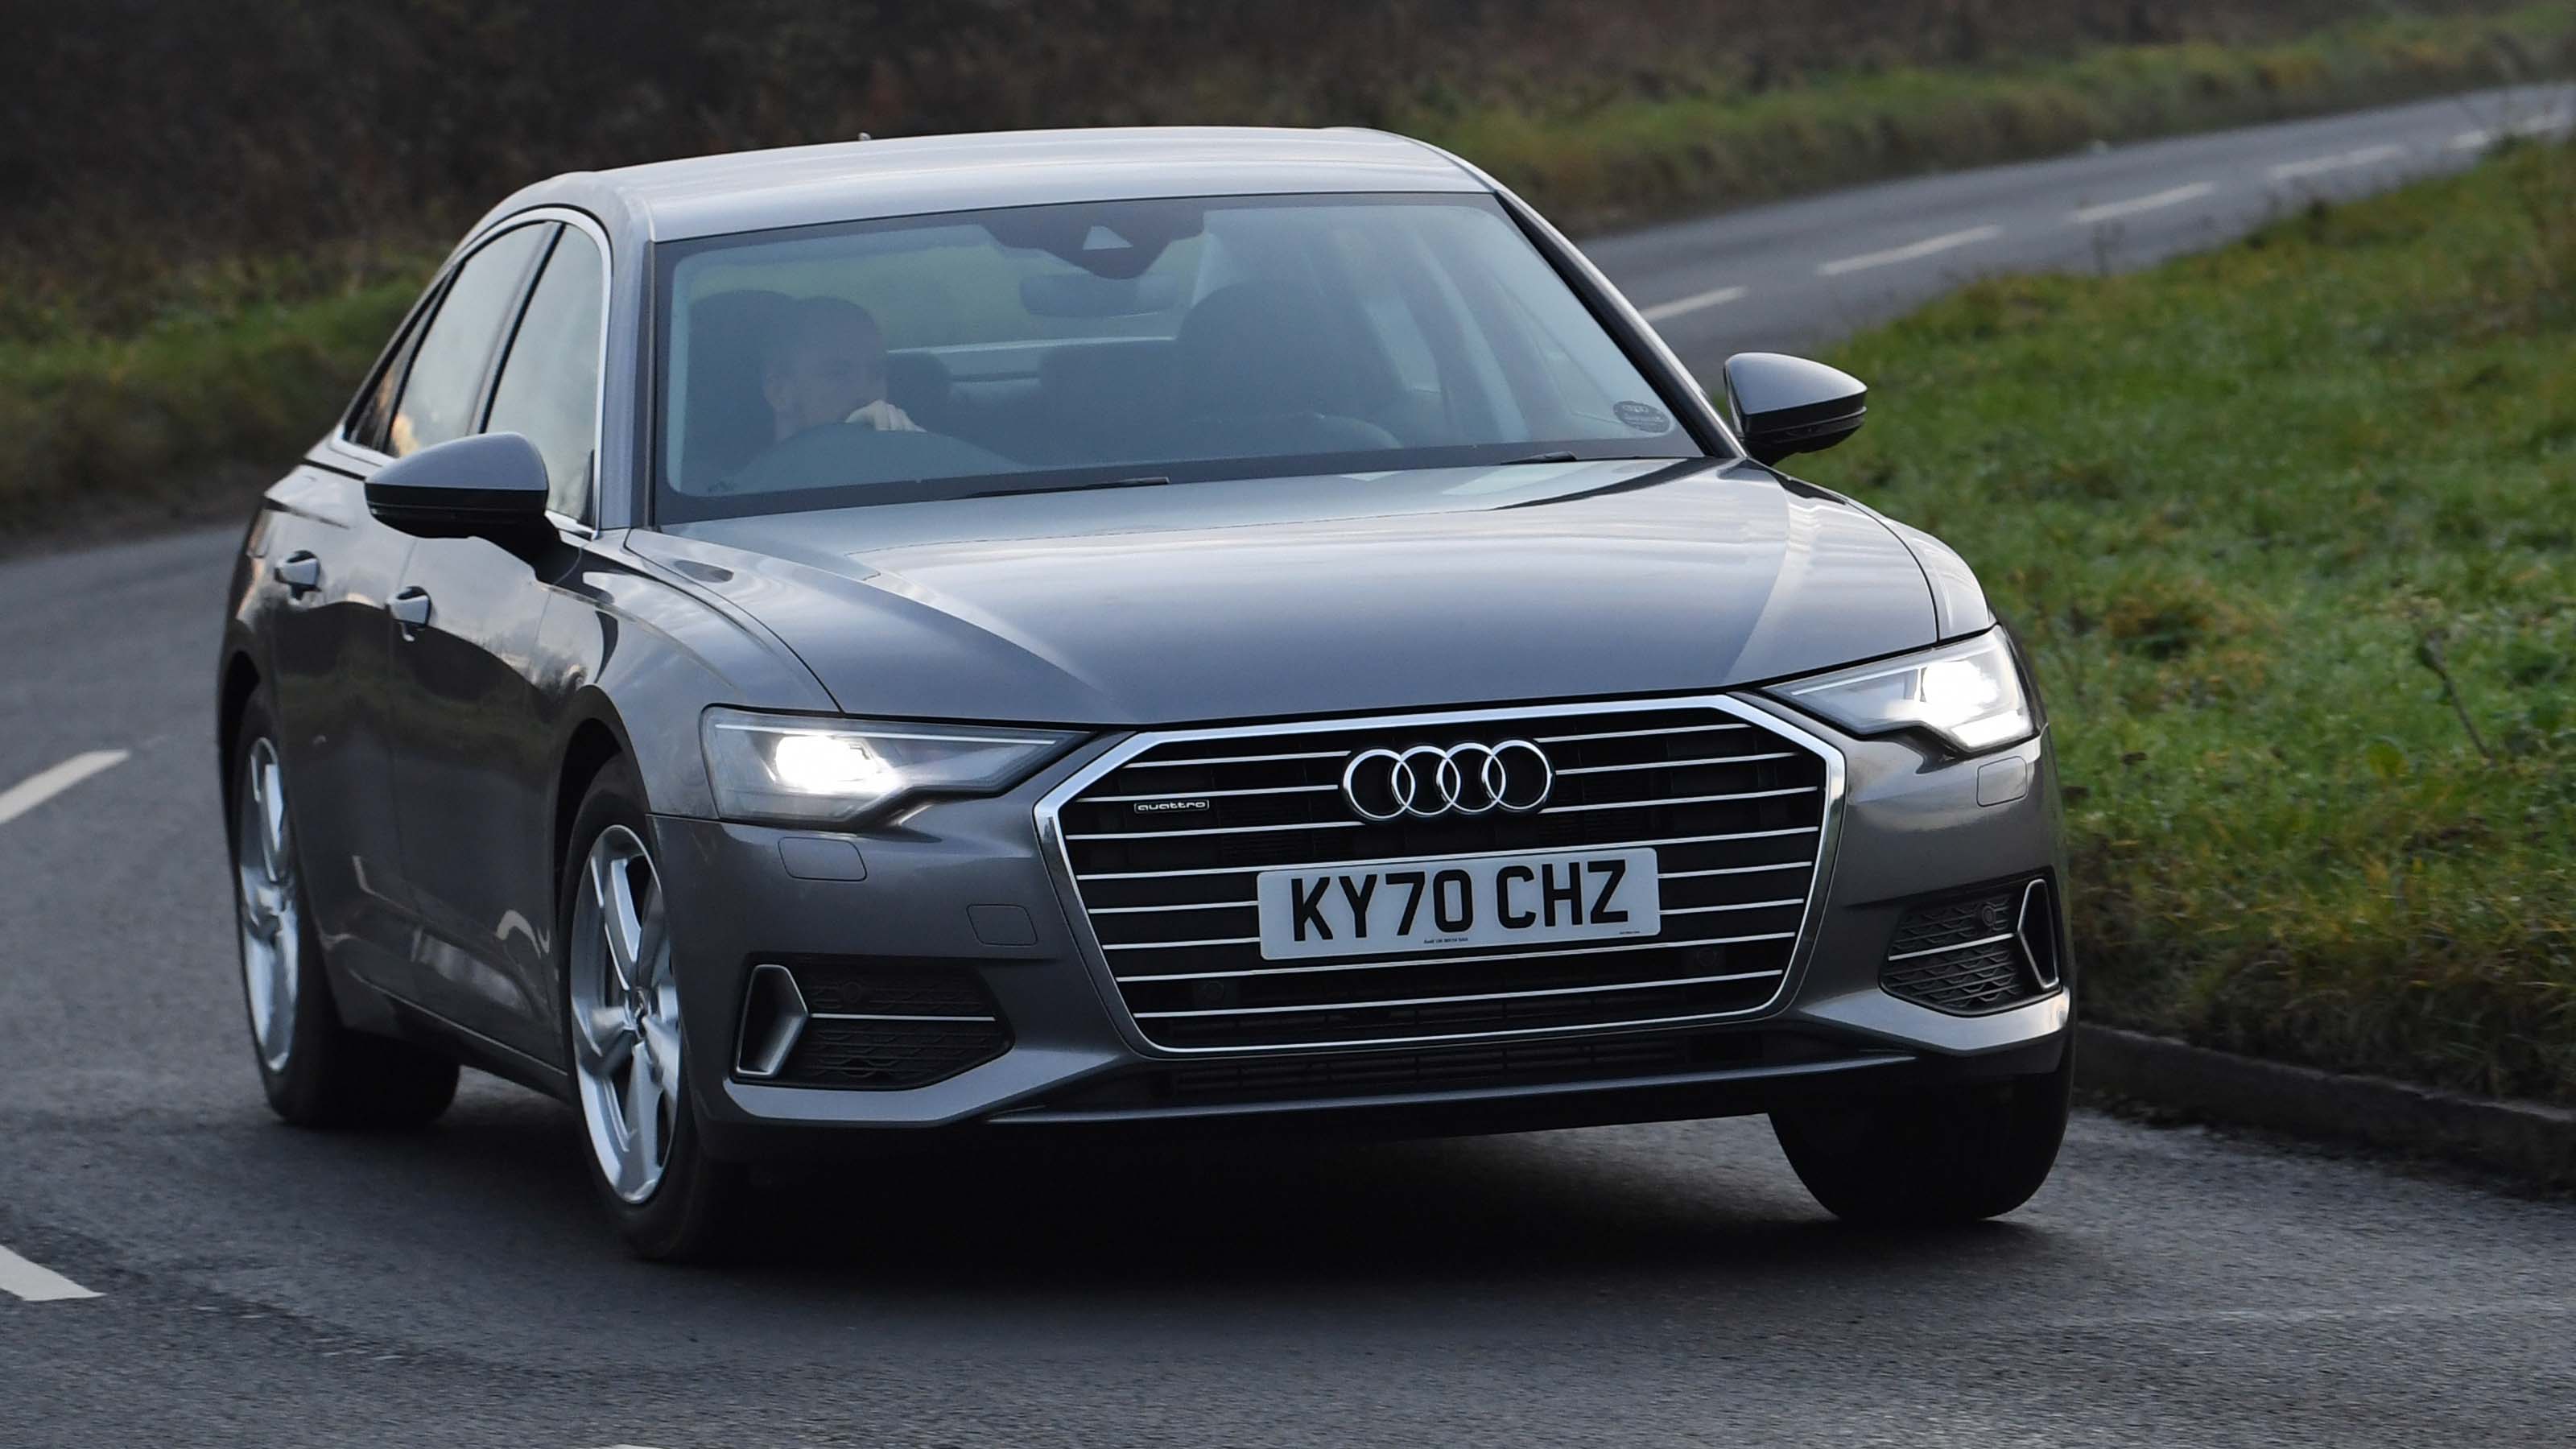 Audi A6 hybrid review | DrivingElectric